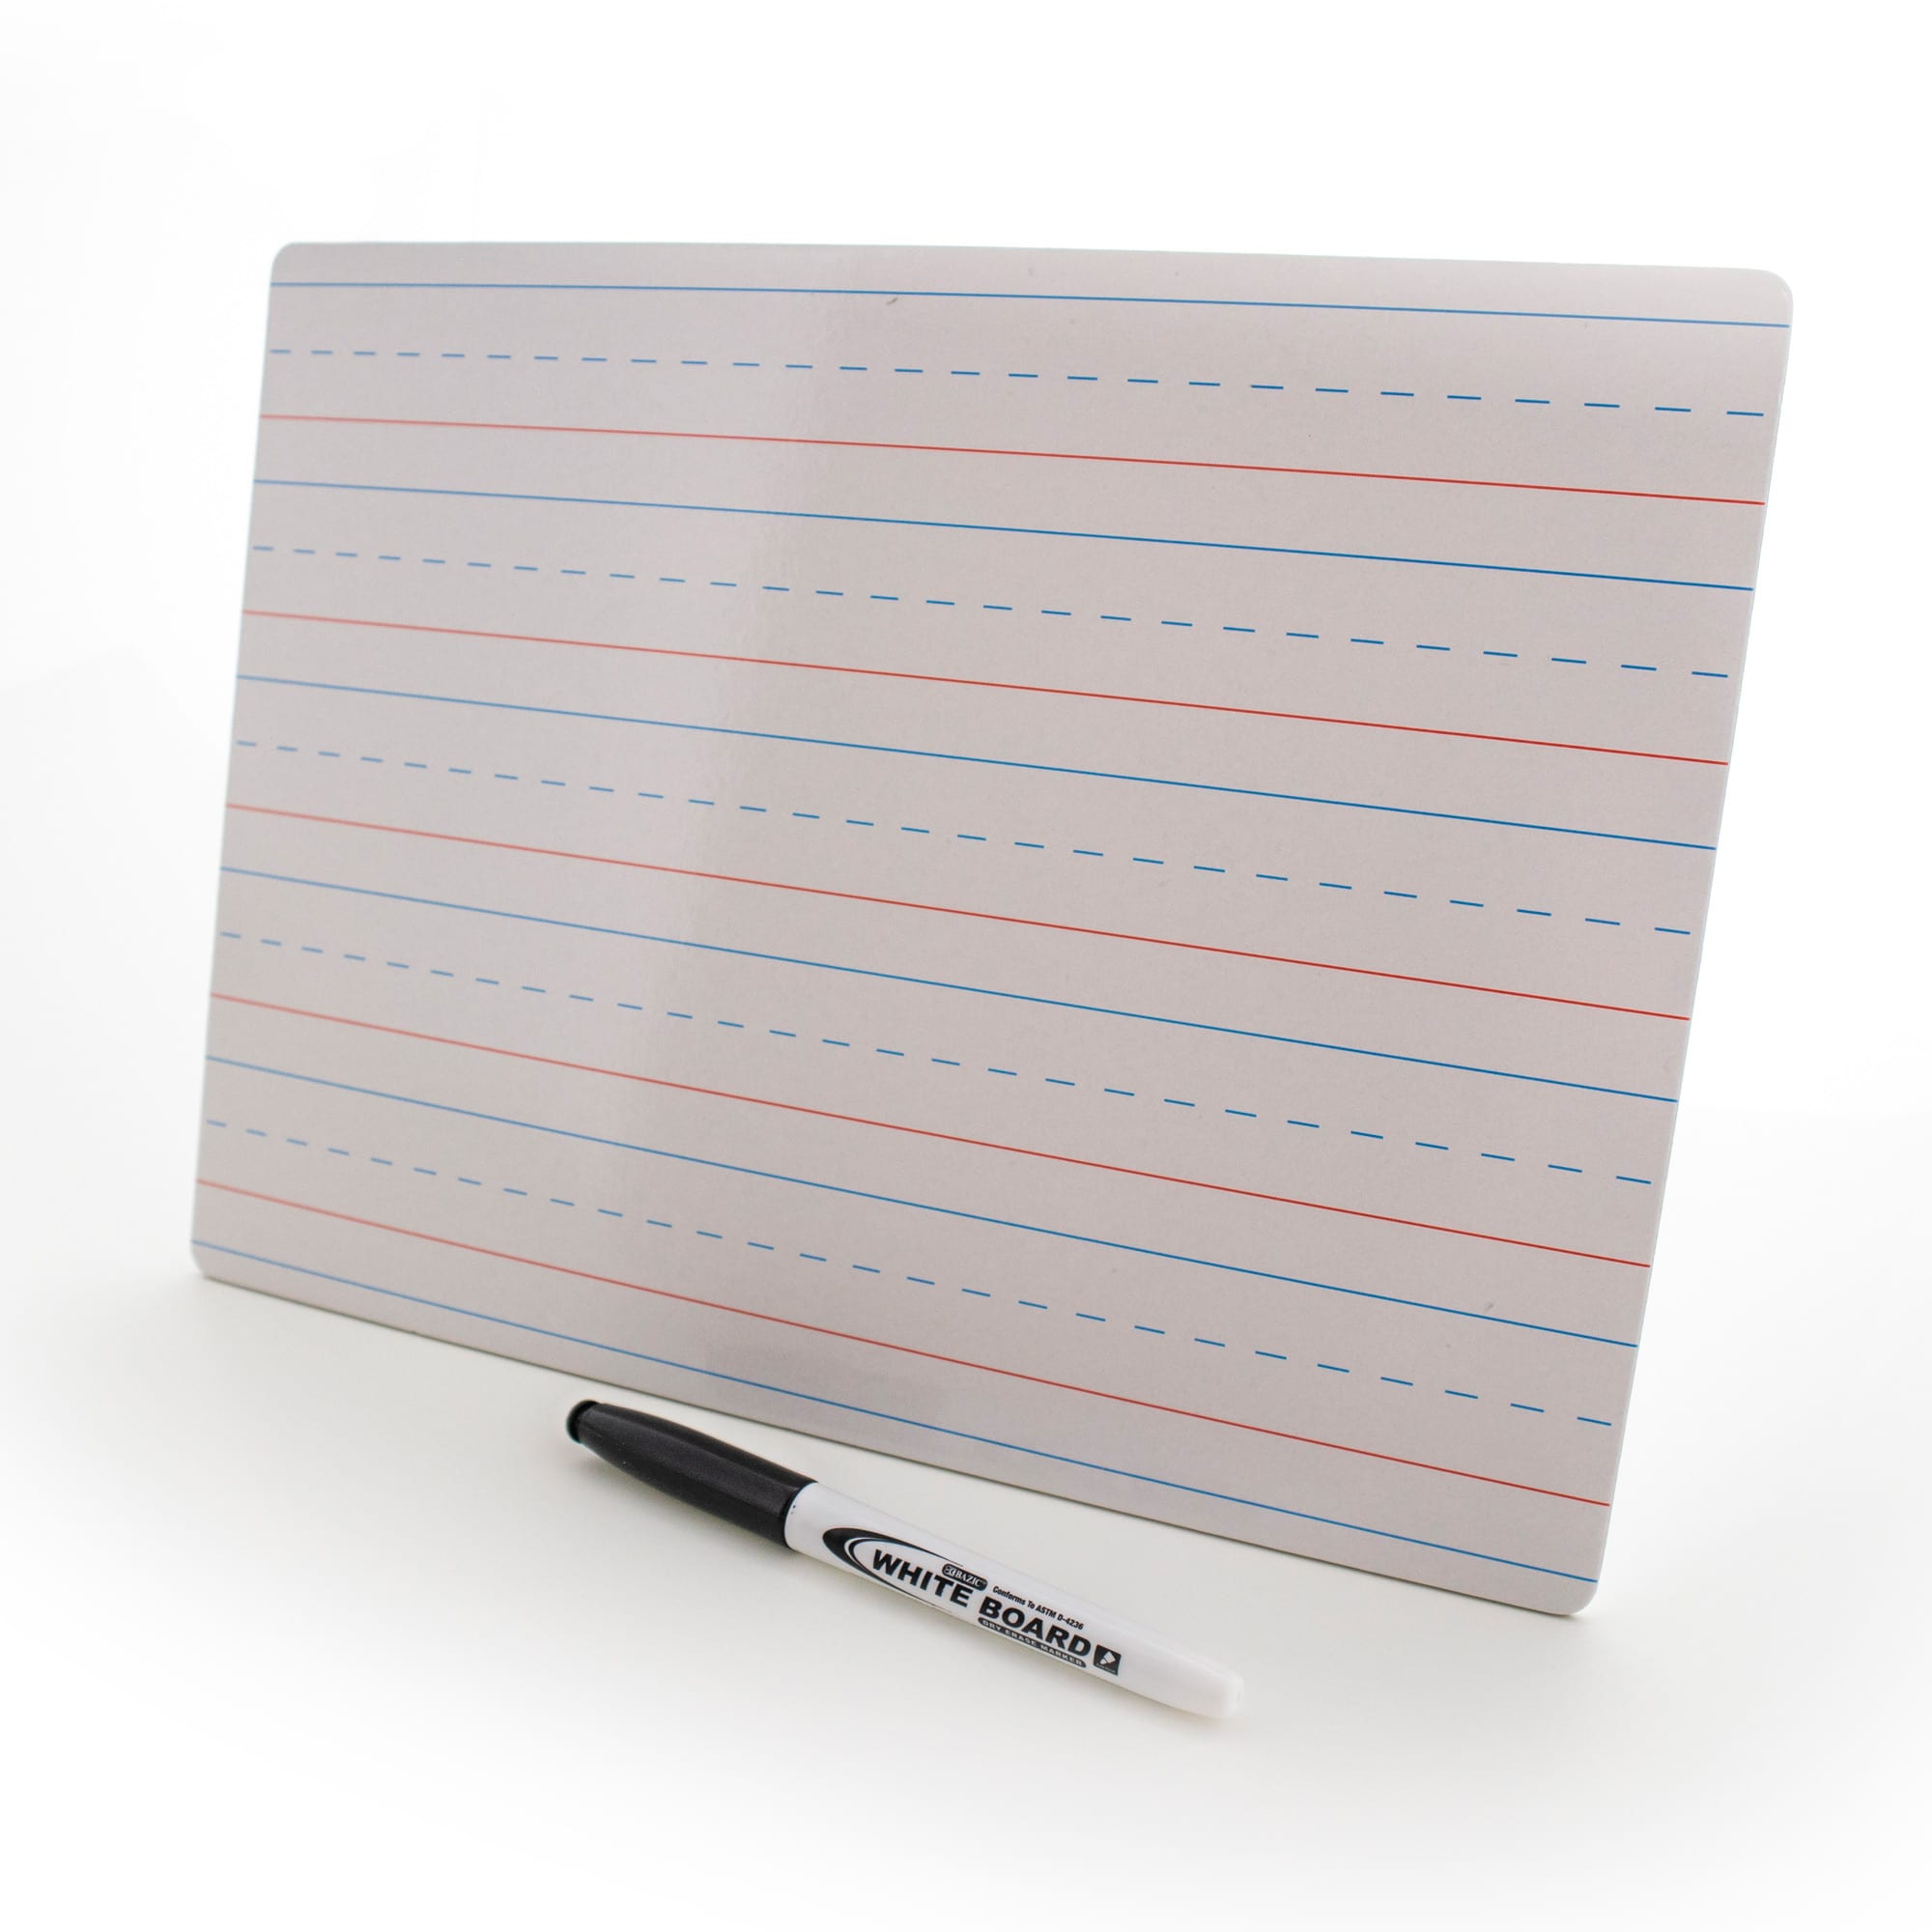 BAZIC 9 X 12 Double Sided Dry Erase Learning Board W Marker Bazic Products